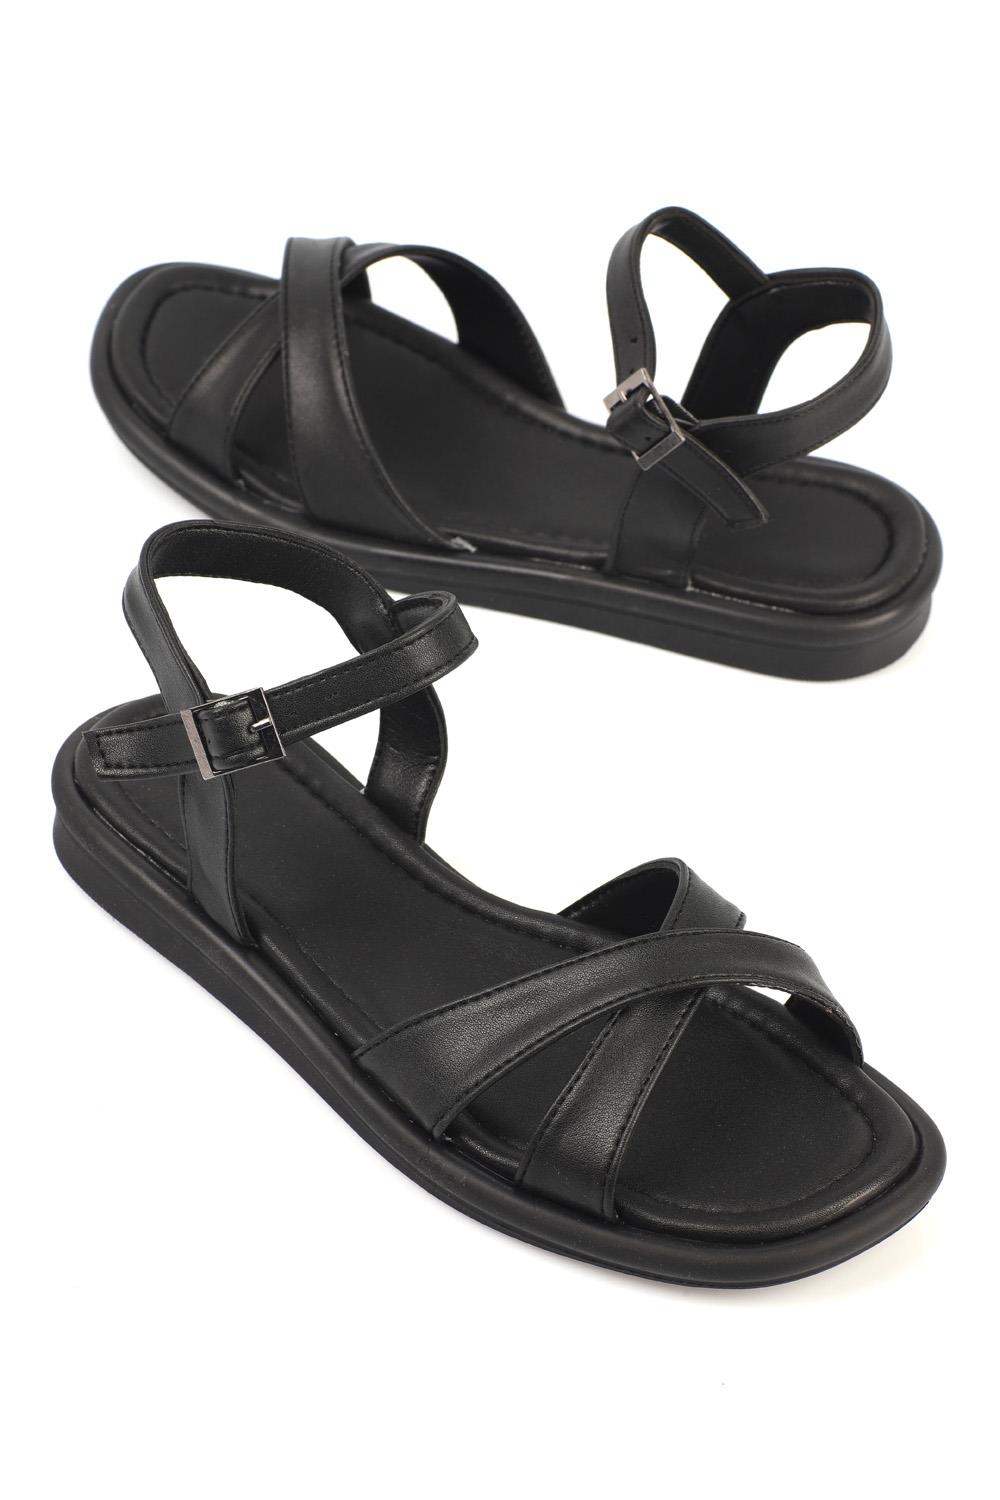 STRIVE New Black Leather Ladies Womens Casual Sandals Shoes RRP £80 UK Size  4 | eBay